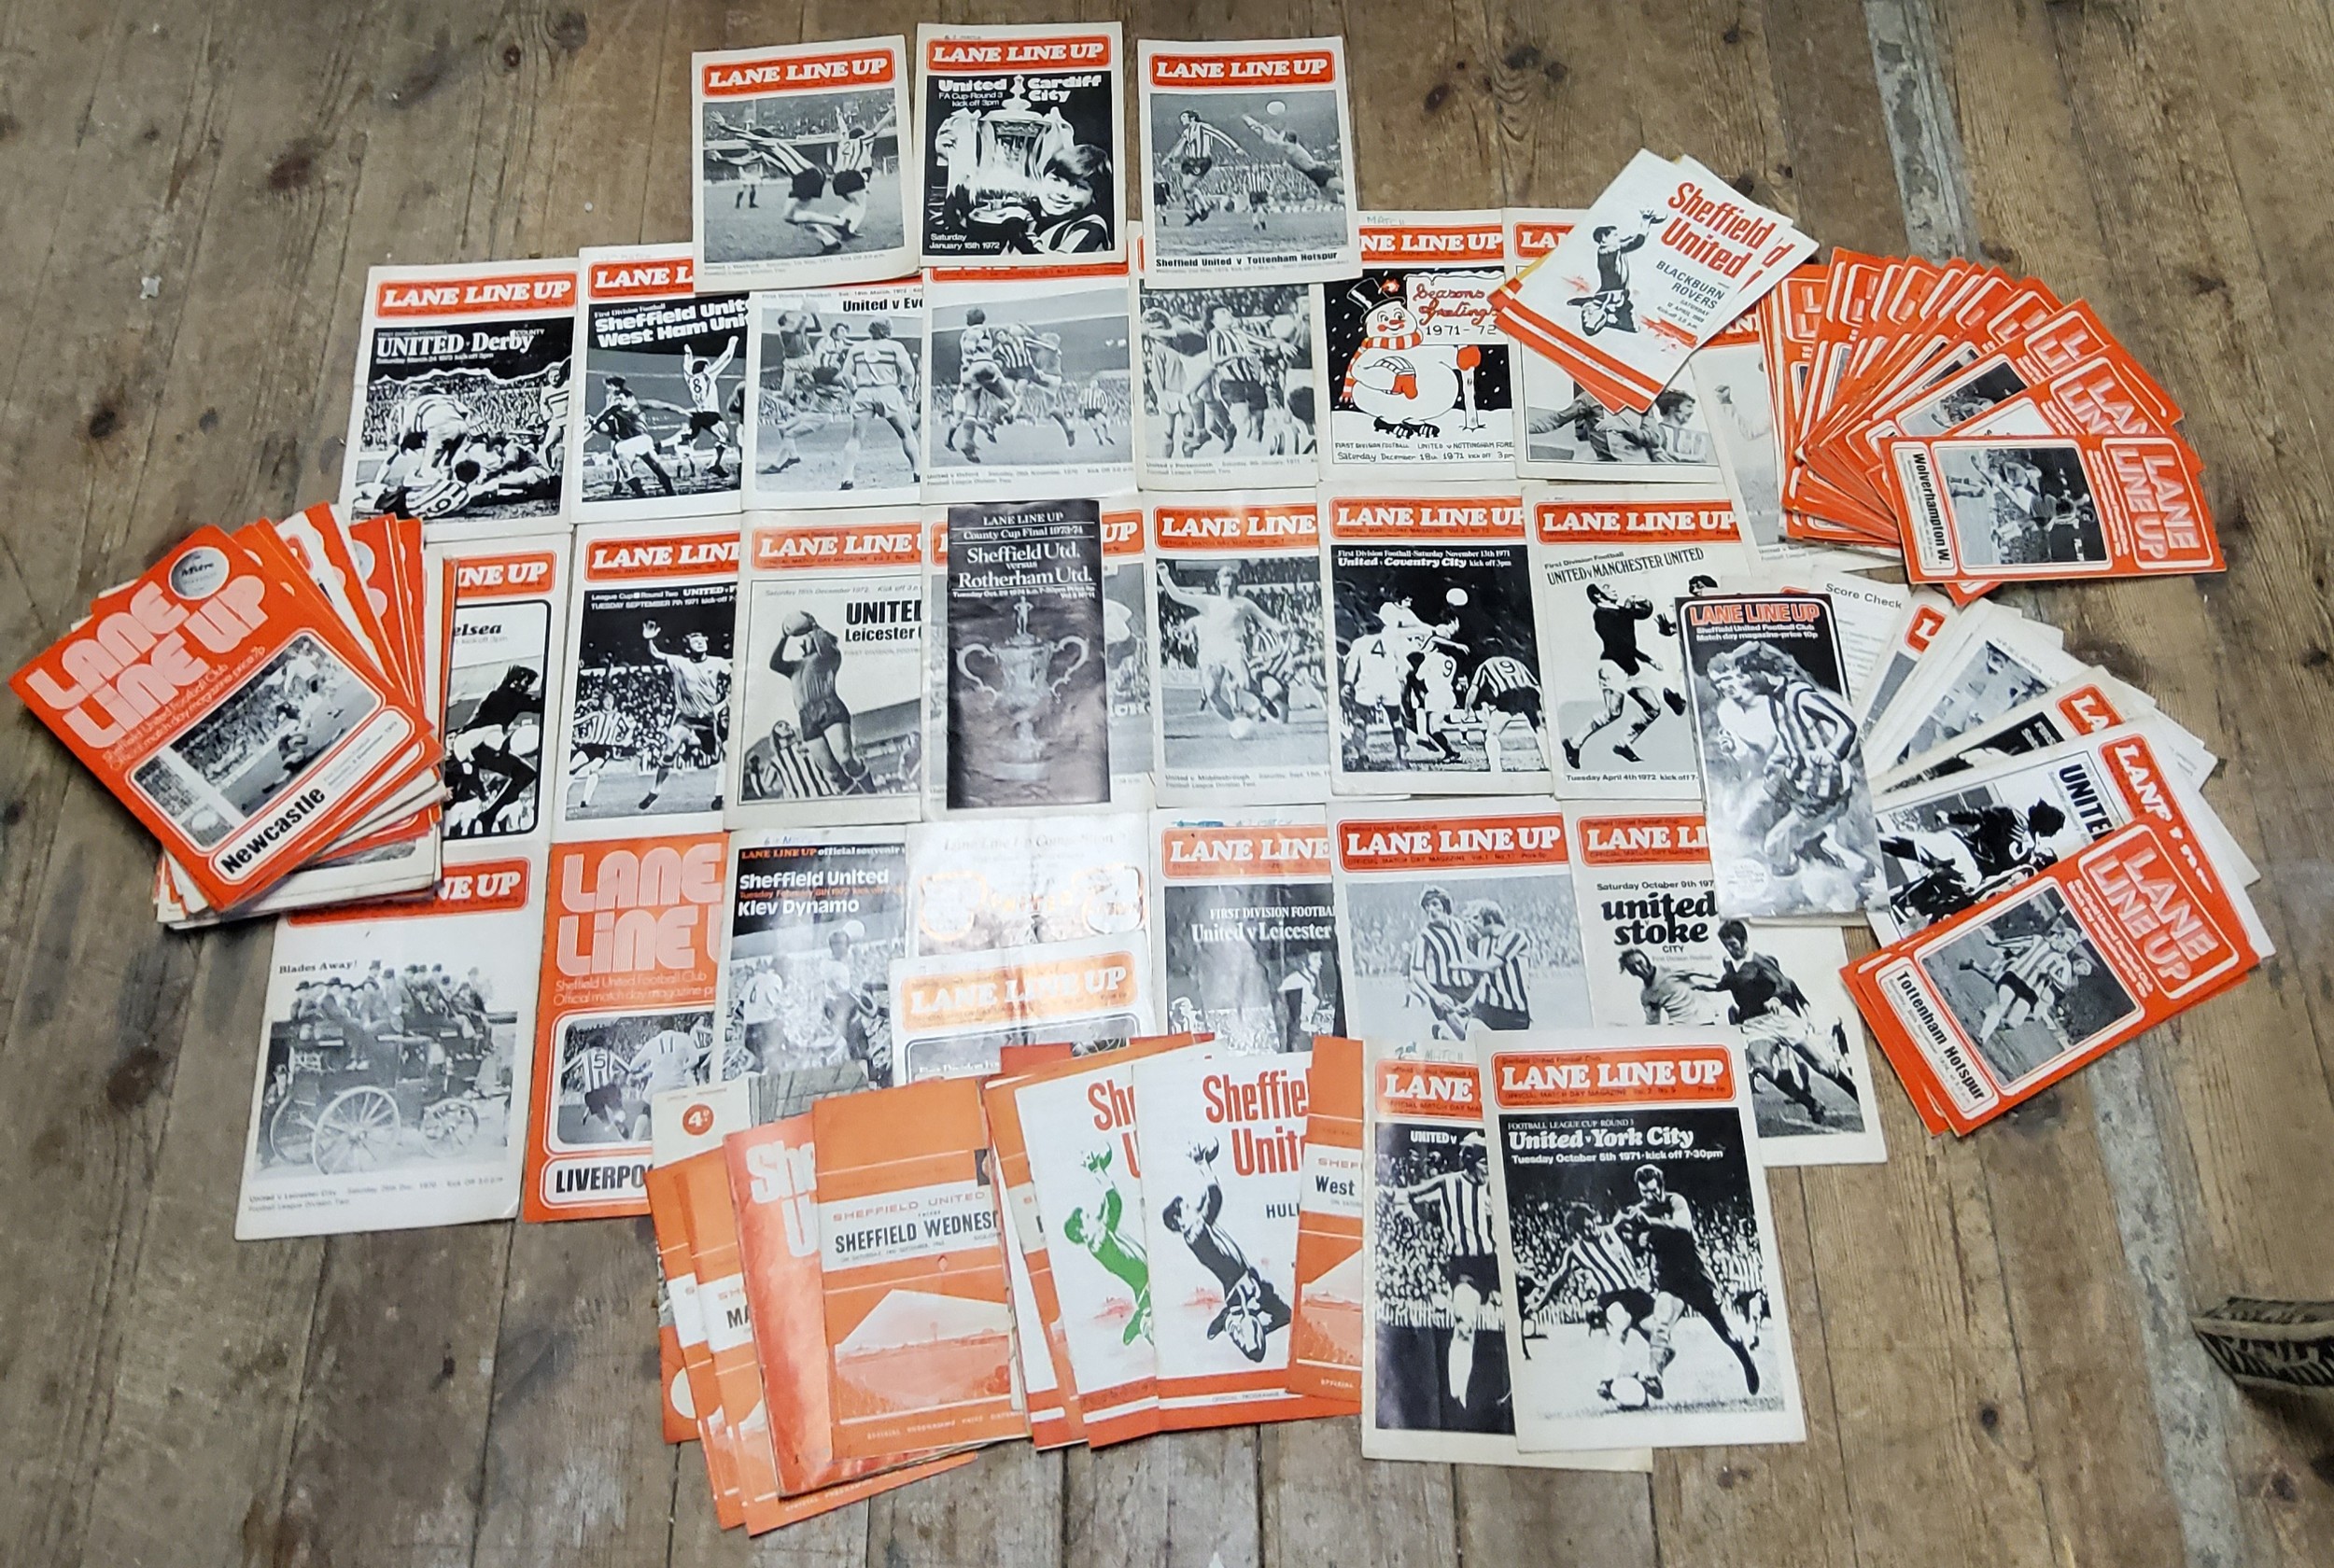 Sheffield United football programmes including various Lane Line Up programmes, mostly 1960's/1970s